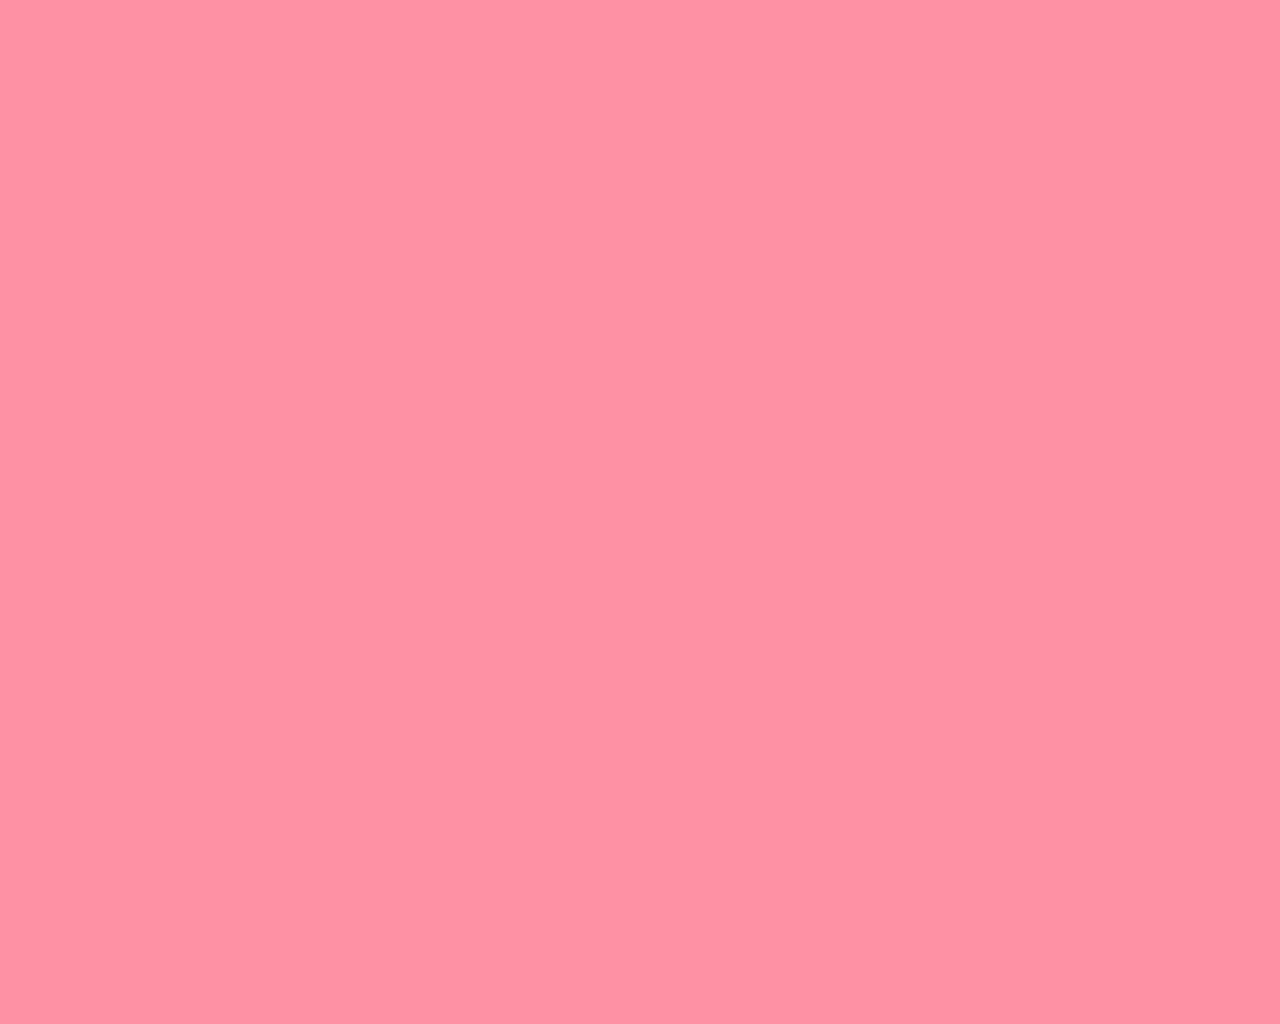 1280x1024 Salmon Pink Solid Color Background